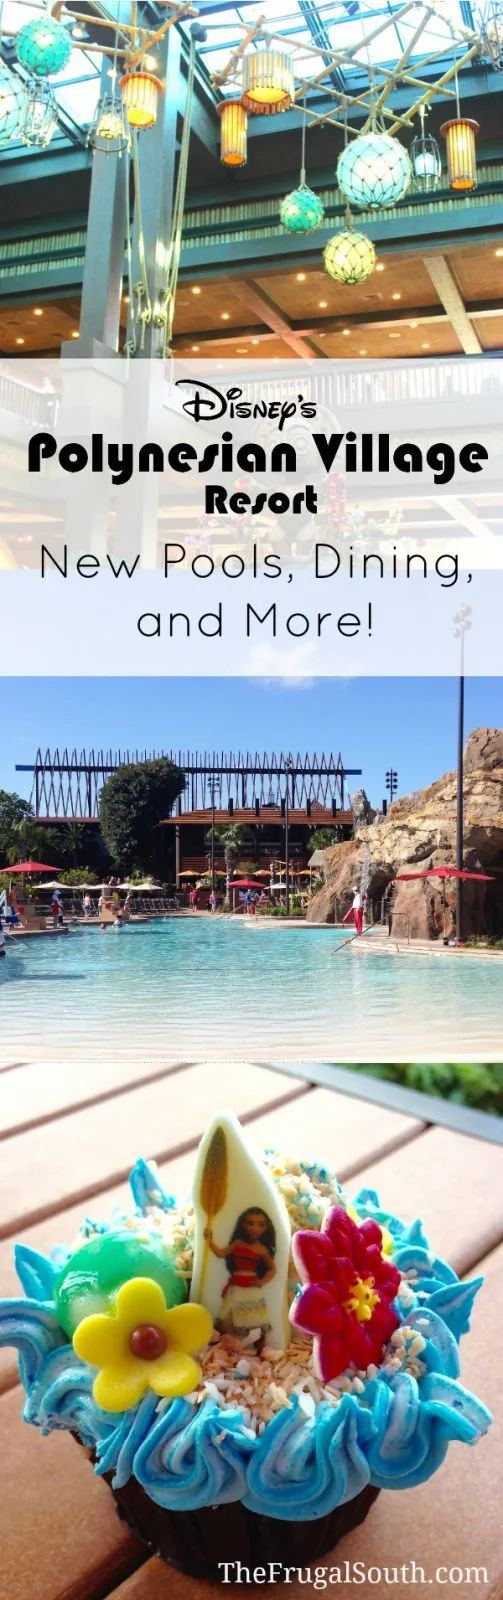 All the details on updates to the pools, dining, and lobby at Disney's Polynesian Village Resort. Tips to help you plan your stay at the Polynesian or just visit the resort. A Disney World Resort Review from The Frugal South.